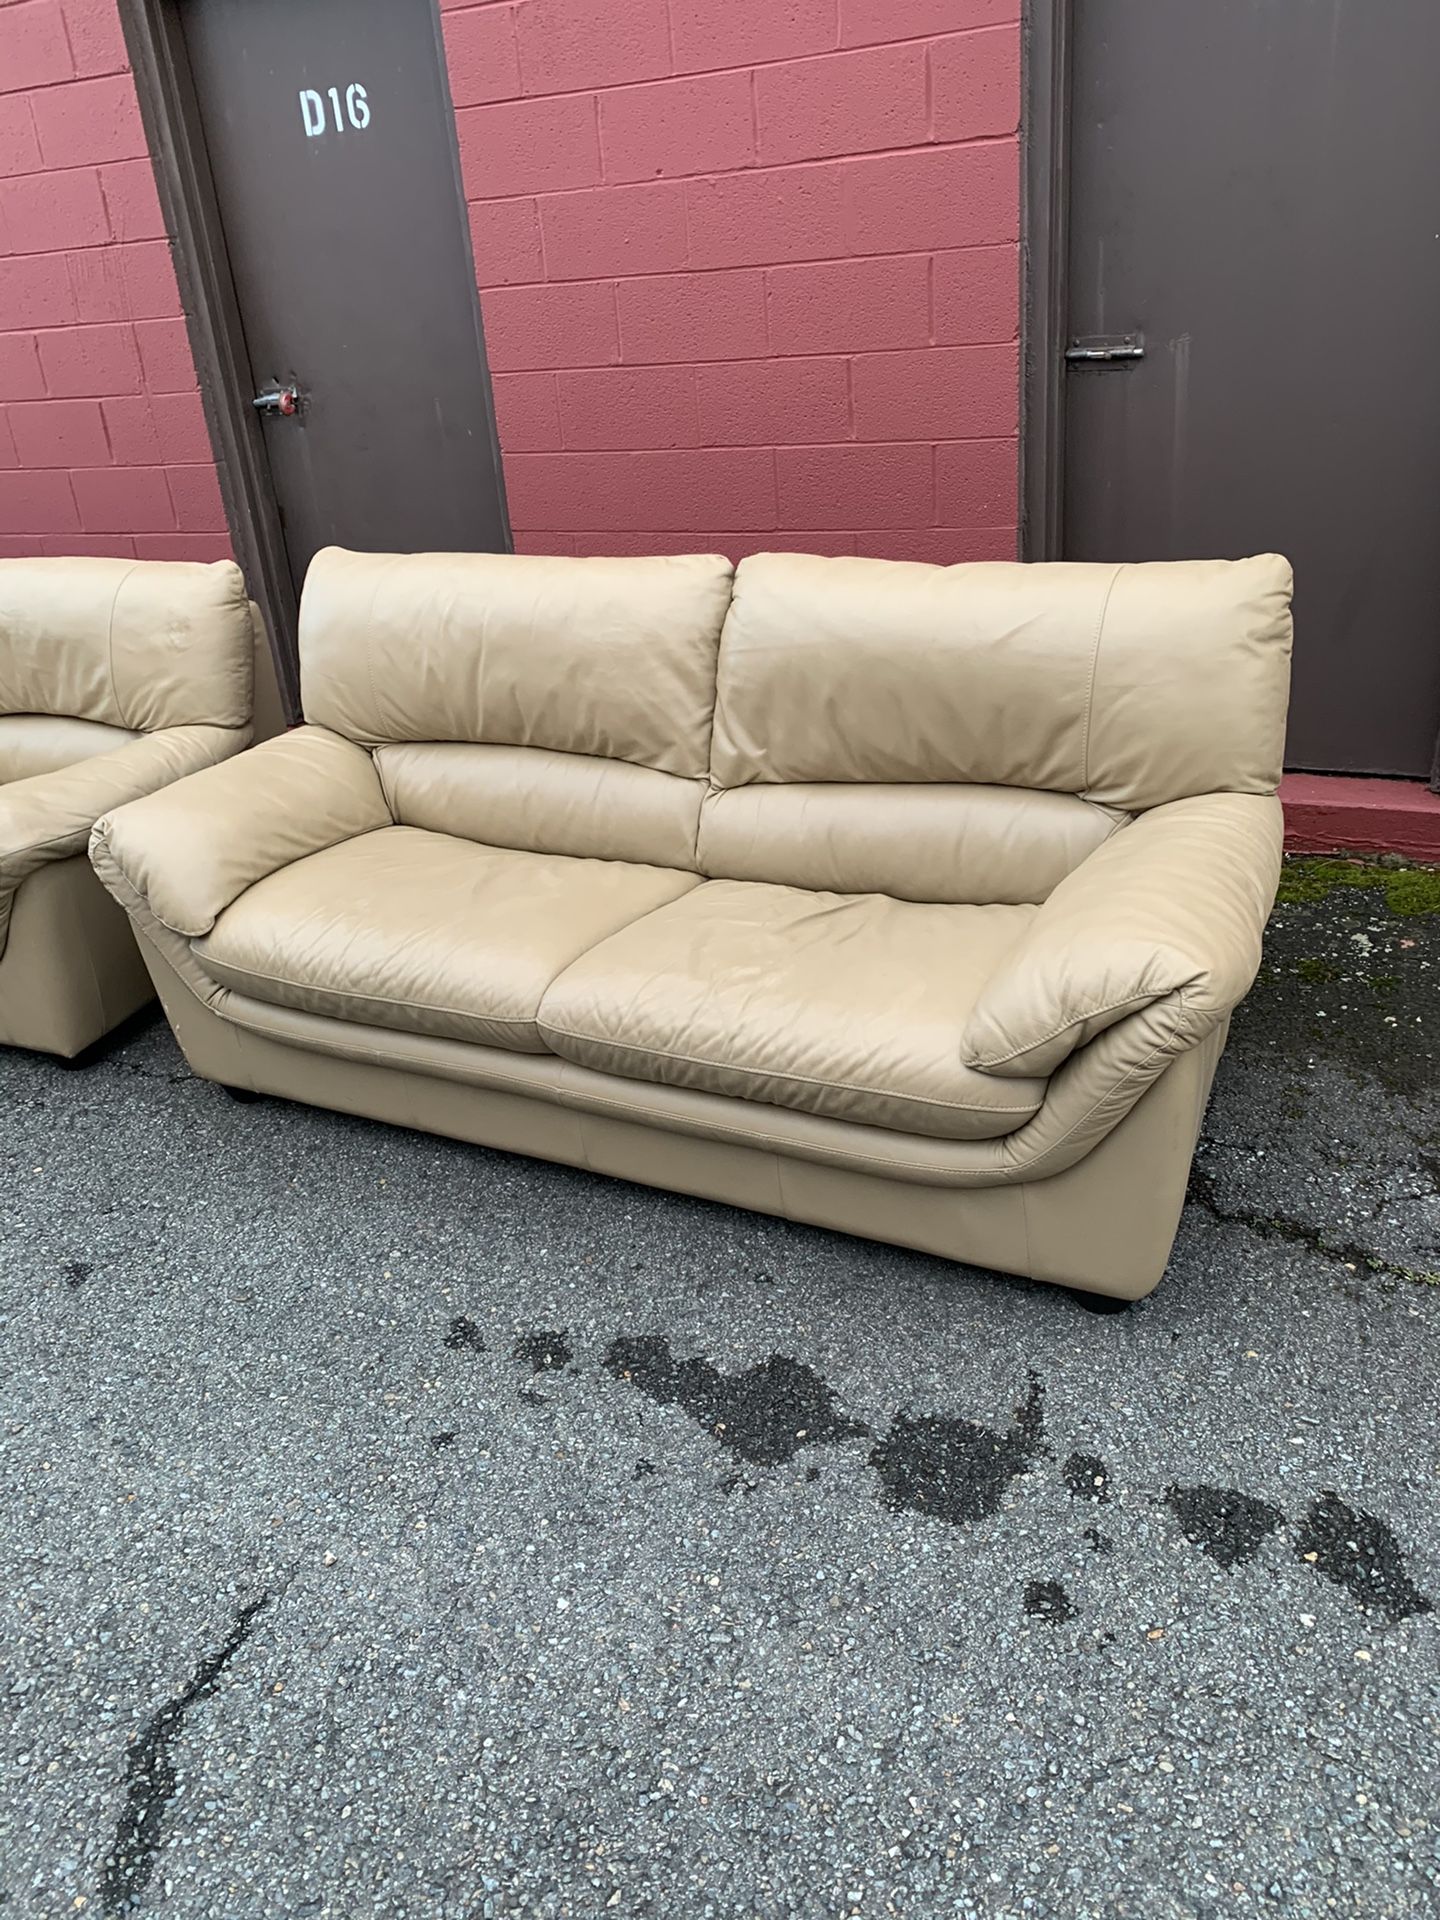 2 seat sofa and armchair set delivery available for local drop off